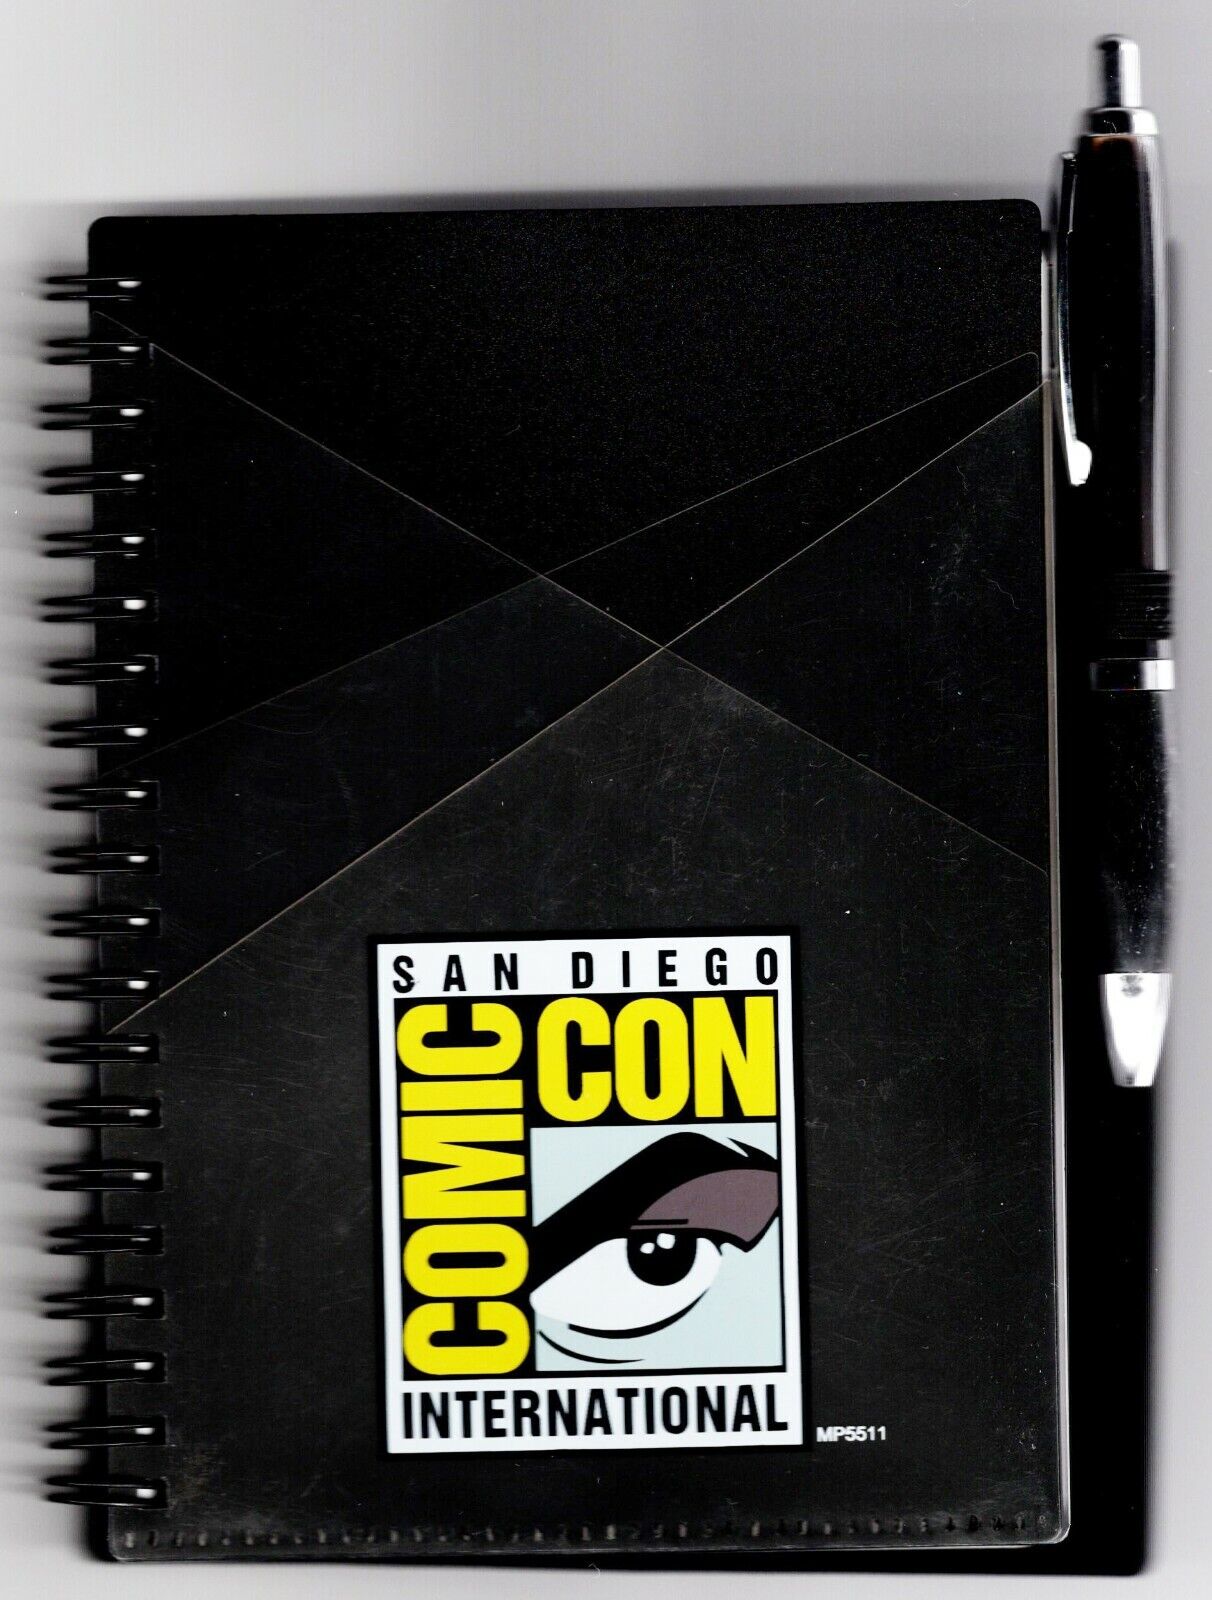 SDCC San Diego Comic Con Exclusive Notepad Notebook w/Pen MP5511-BK Sweda